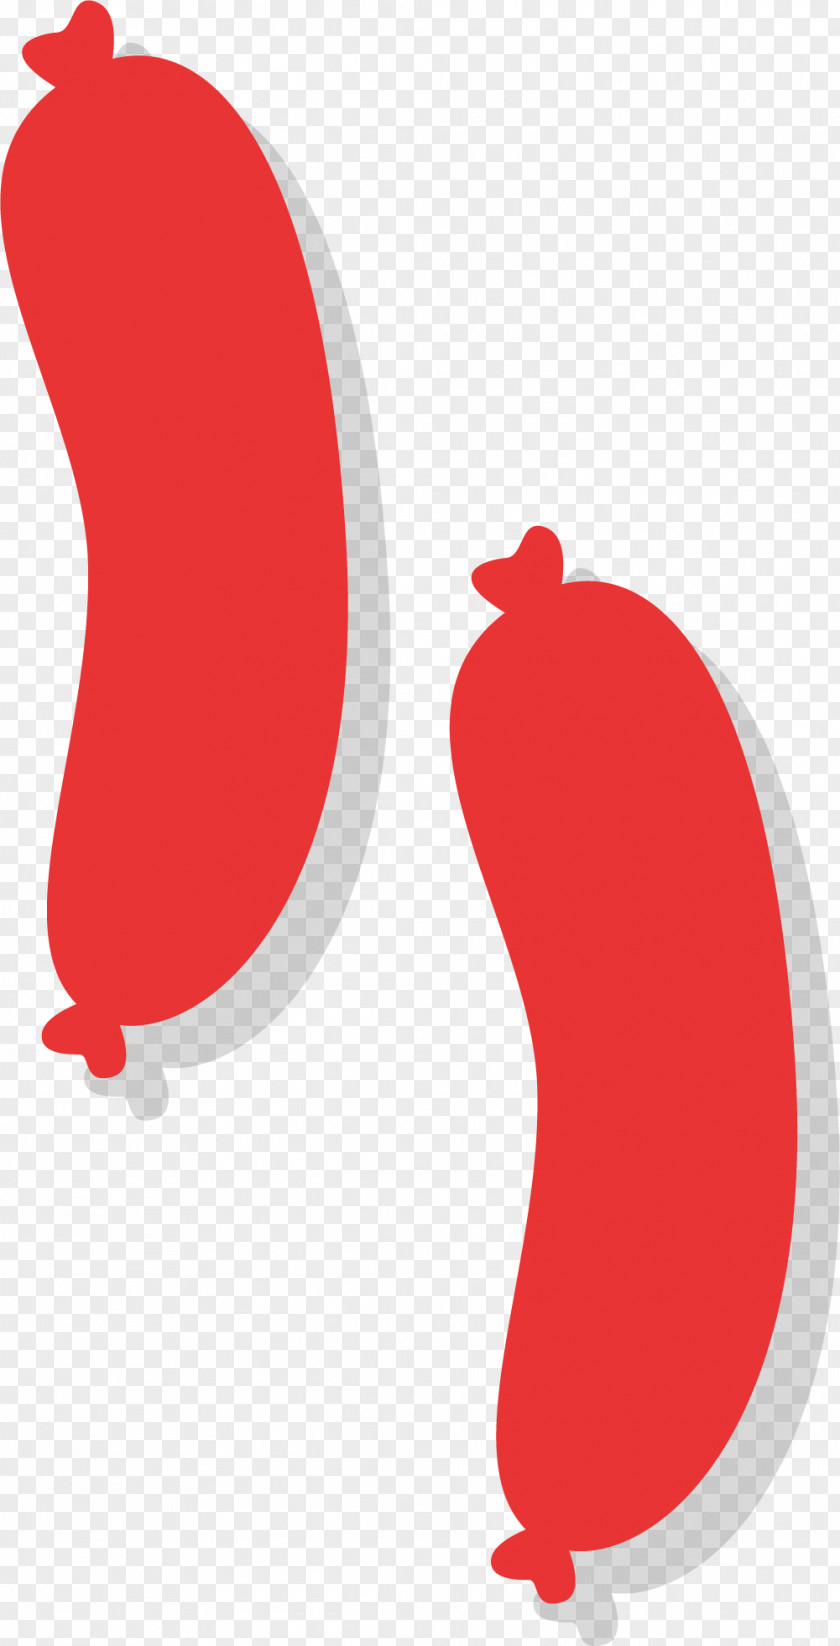 Compact Bacon Meat Clip Art PNG